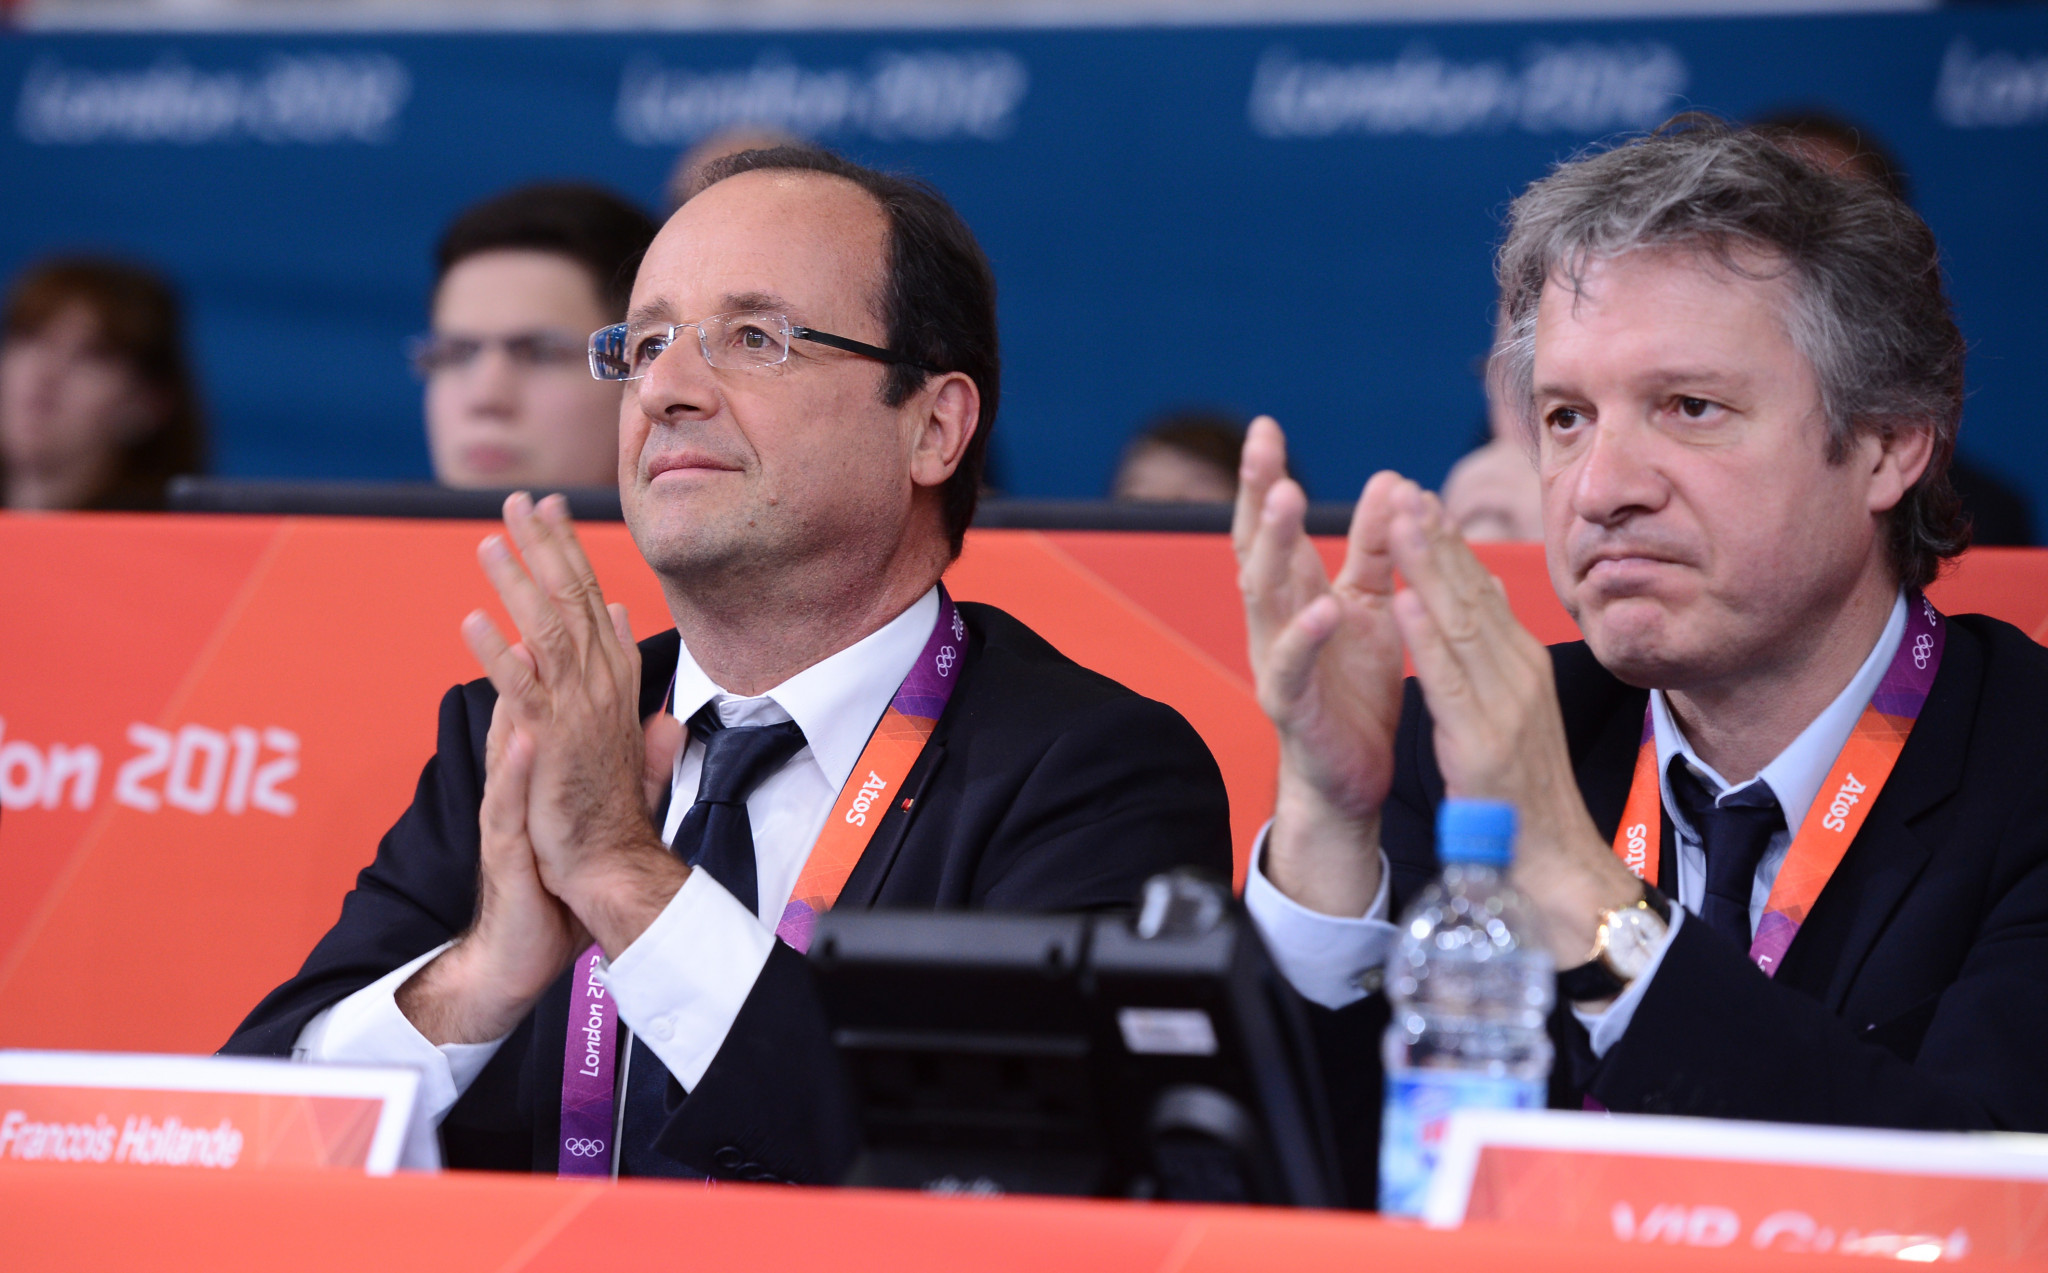 Thierry Rey, right, was youth and sports advisor to the French President François Hollande from 2012 to 2014 ©Getty Images